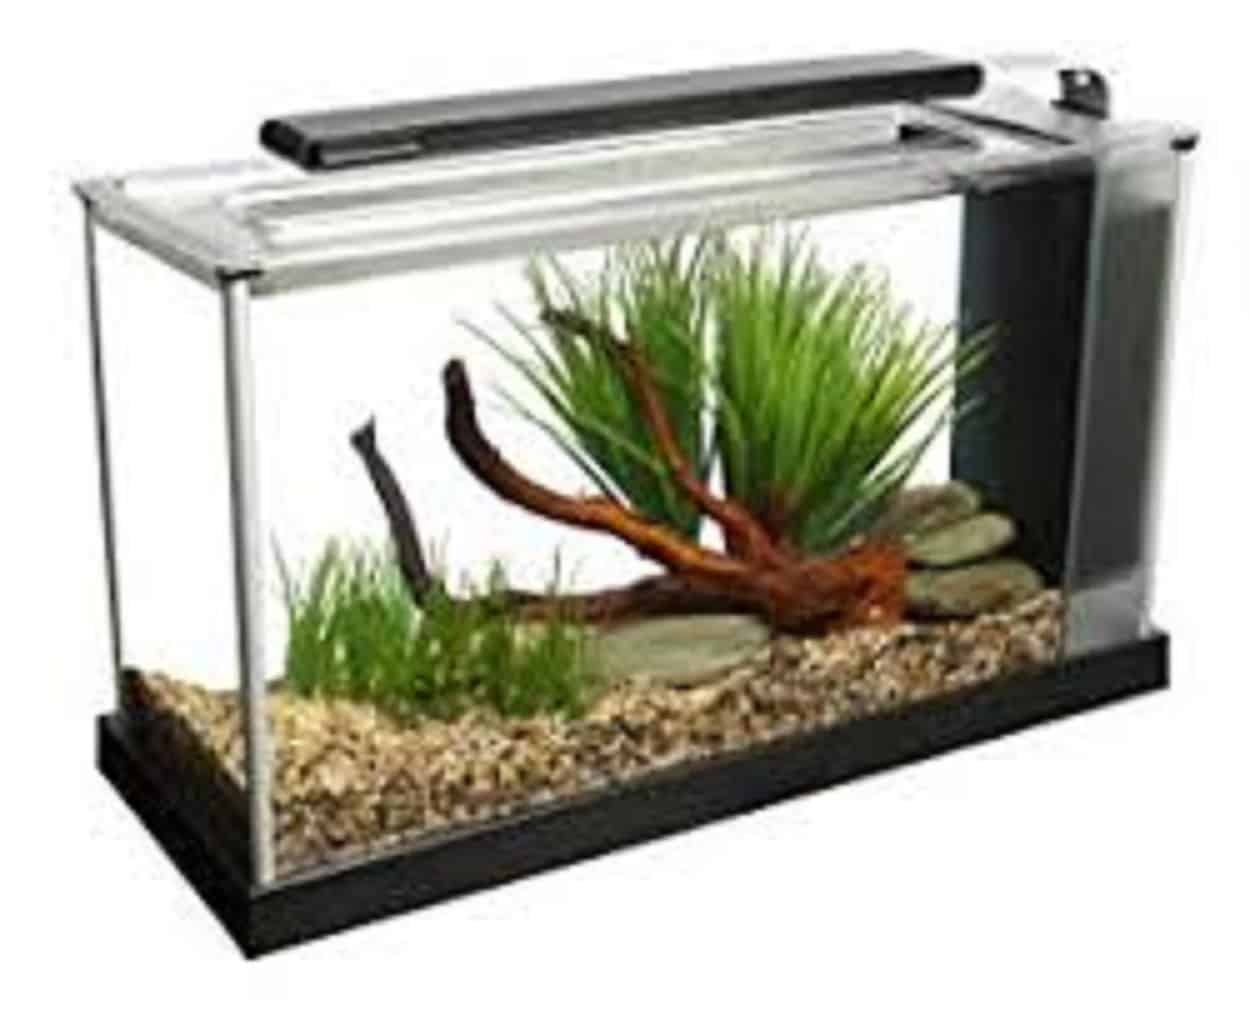 Best fish tank – What to Consider